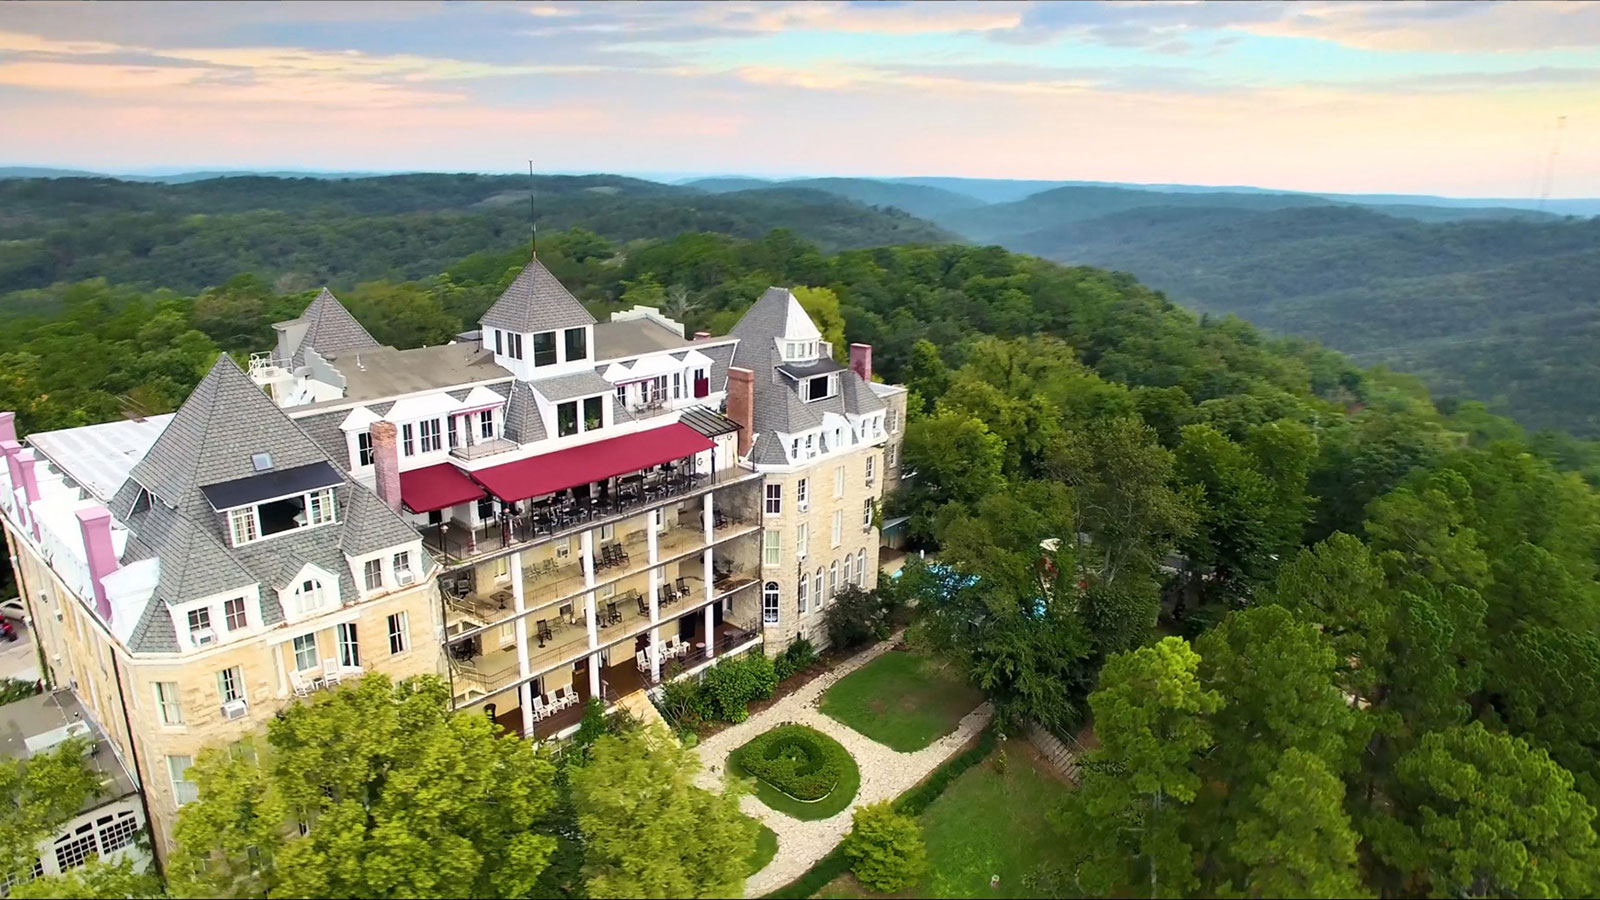 Image of Hotel Exterior 1886 Crescent Hotel & Spa, Member of Historic Hotels of America, in Eureka Springs, Arkansas, Overview